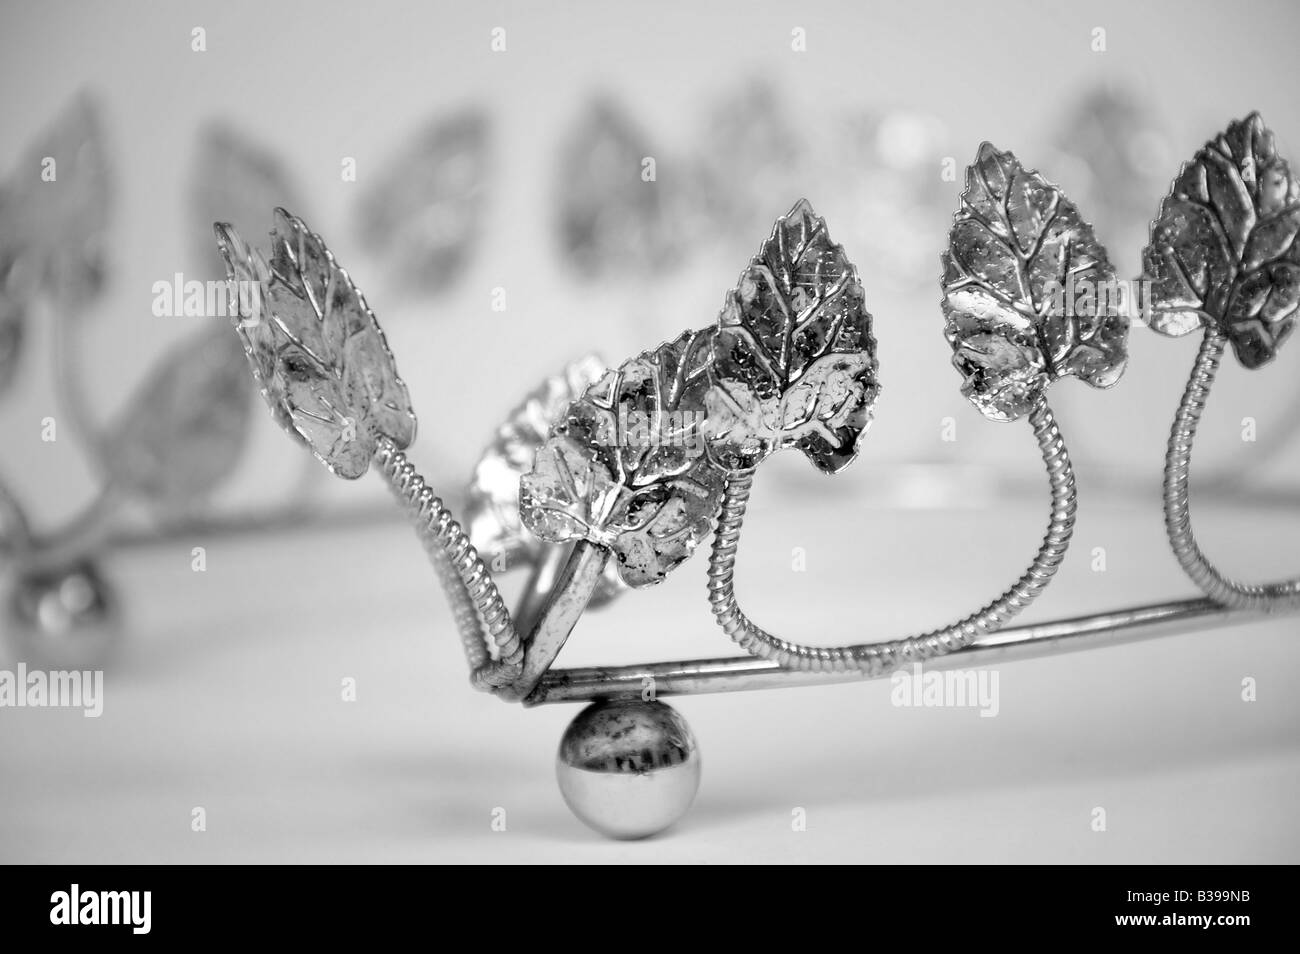 Greyscale, black and white, B&W, BW rustic silver leaf crown winter Christmas interpretation concept Stock Photo